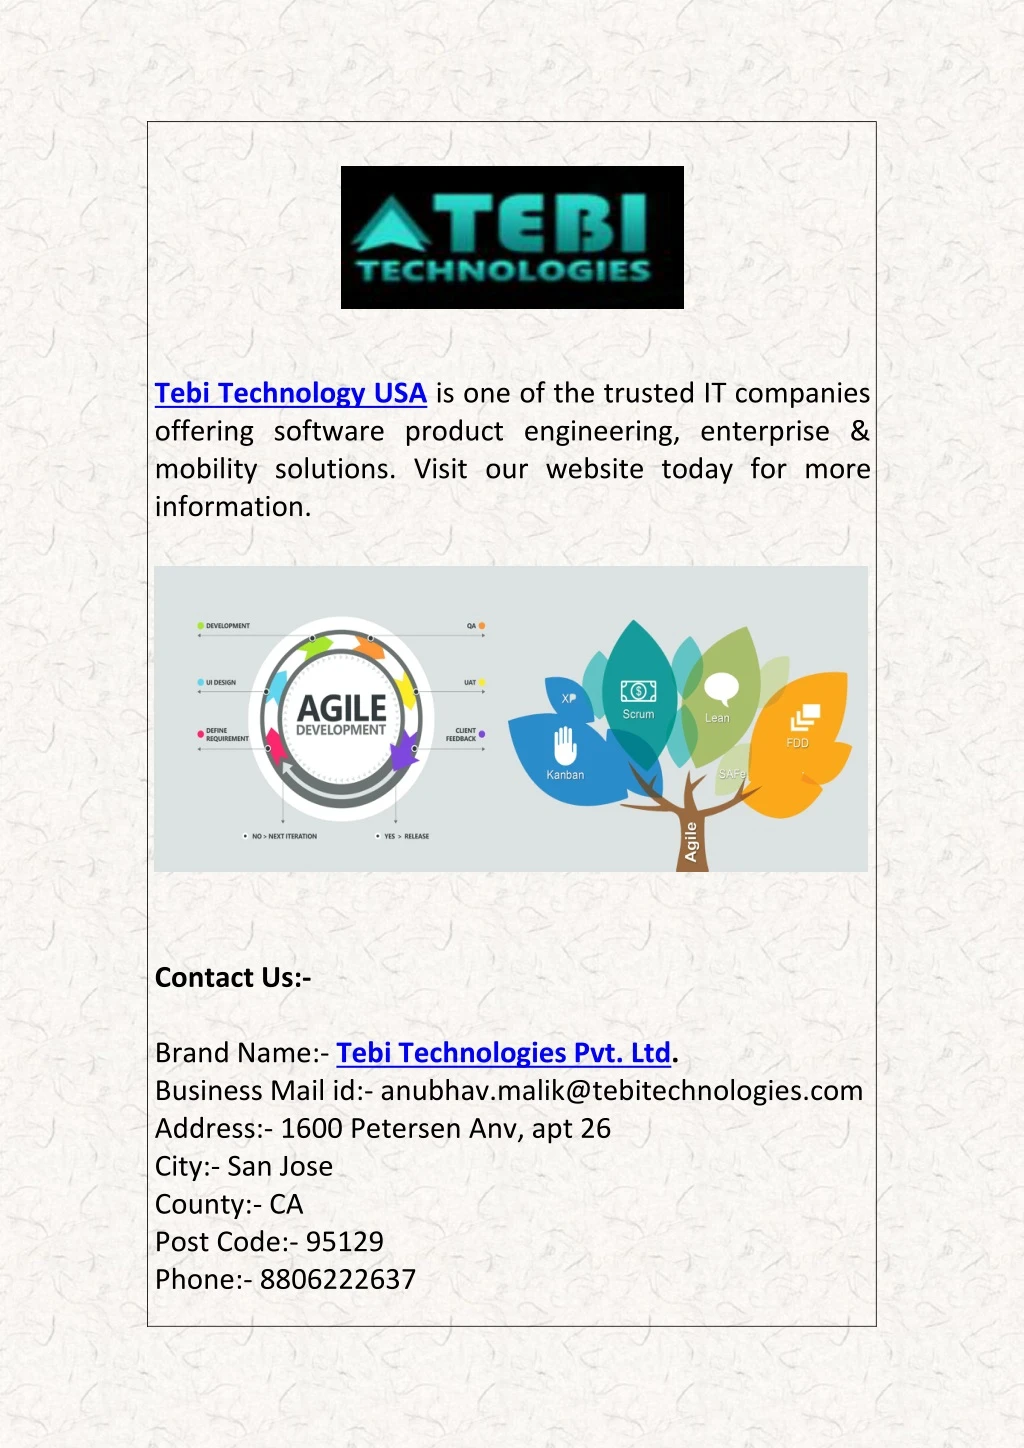 tebi technology usa is one of the trusted